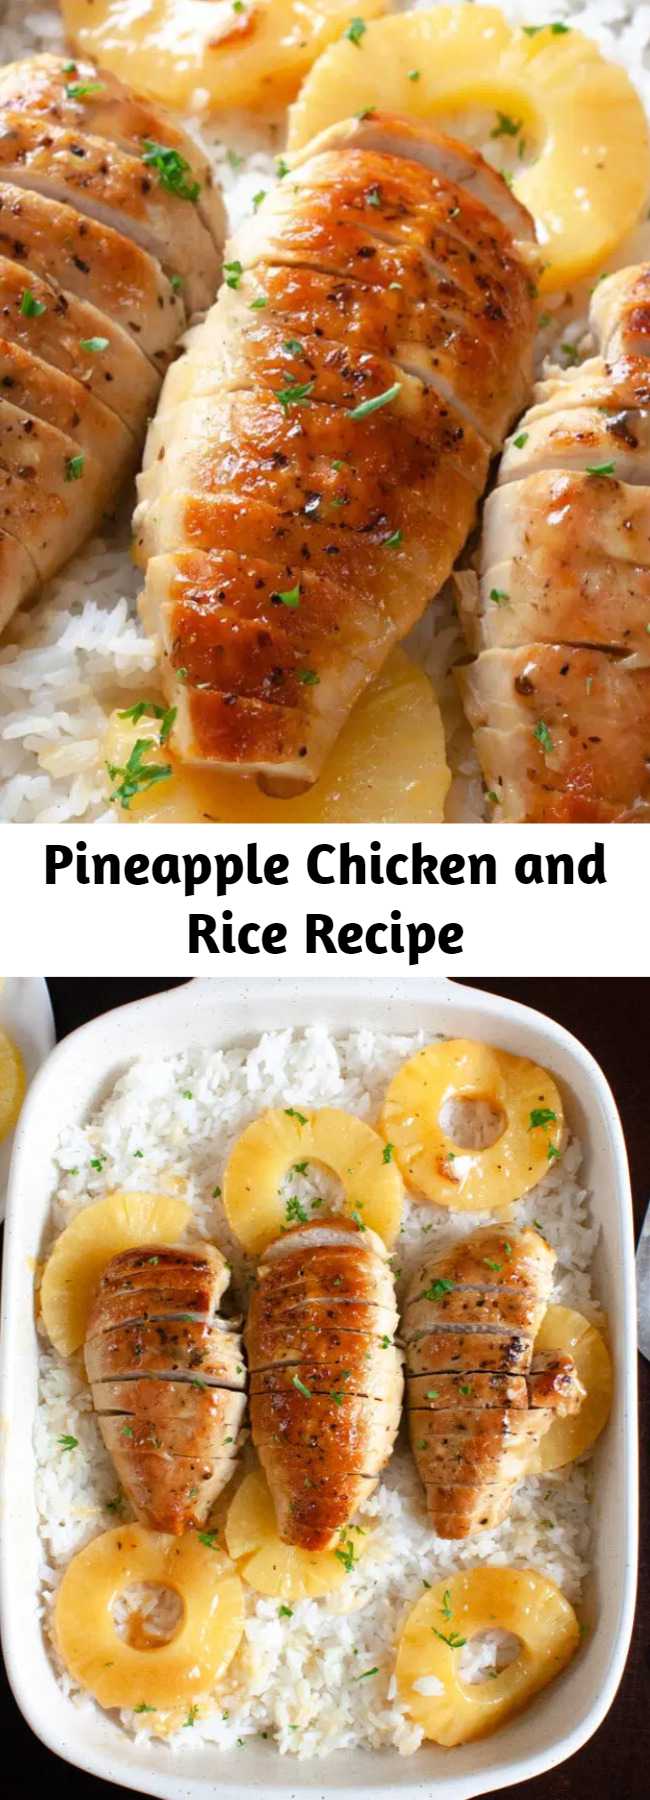 Pineapple Chicken and Rice Recipe - Pineapple Chicken with Rice Dinner Recipe. Tender chicken cooked in a sweet pineapple honey Dijon sauce and served over rice.